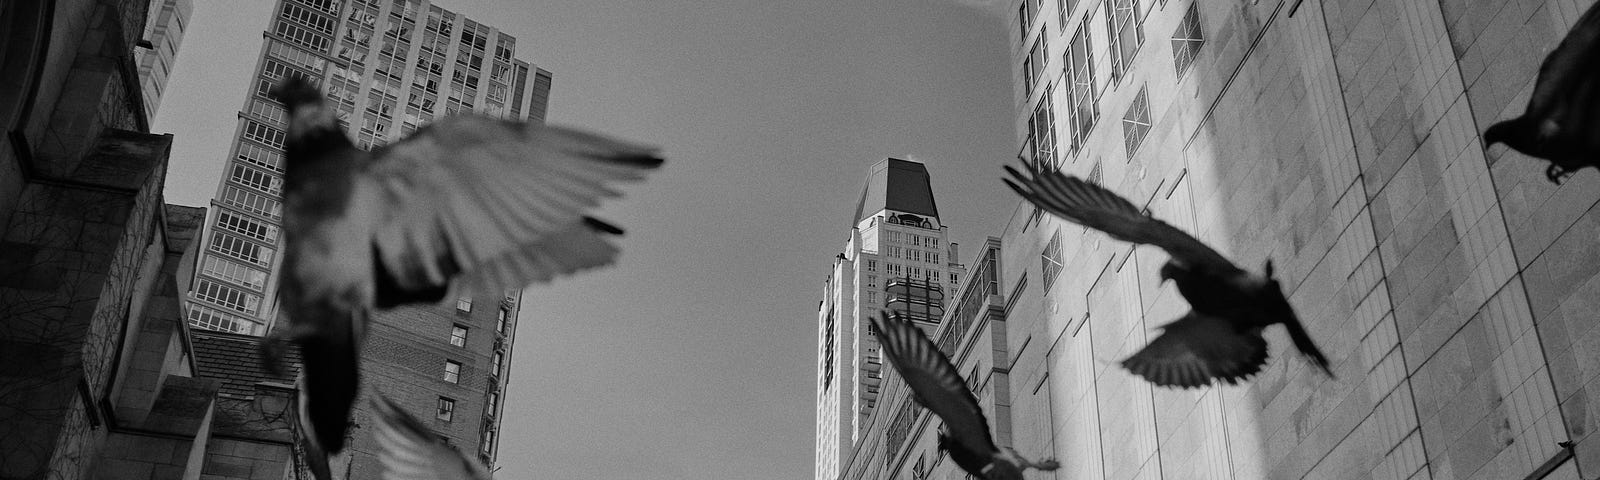 birds flying low in the city